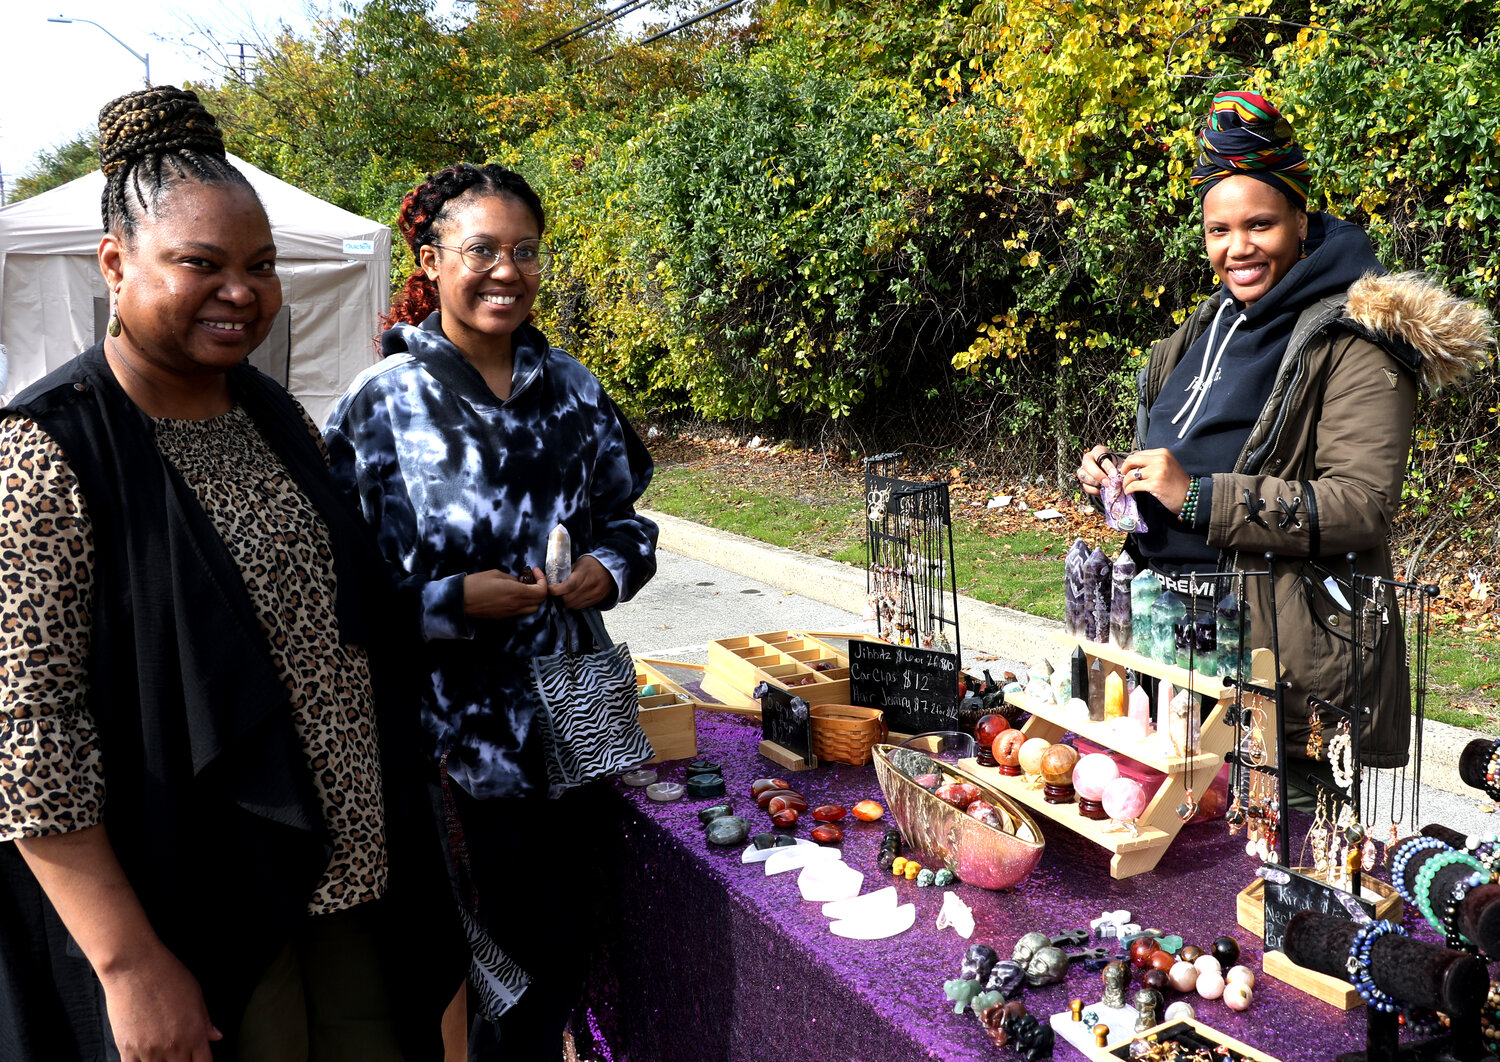 Cecilia Carter with her daughter Ateah Carter purchasing a few crystals and handmade jewelry pieces from Jewel Scott, business owner of Johari’s Shoppe.